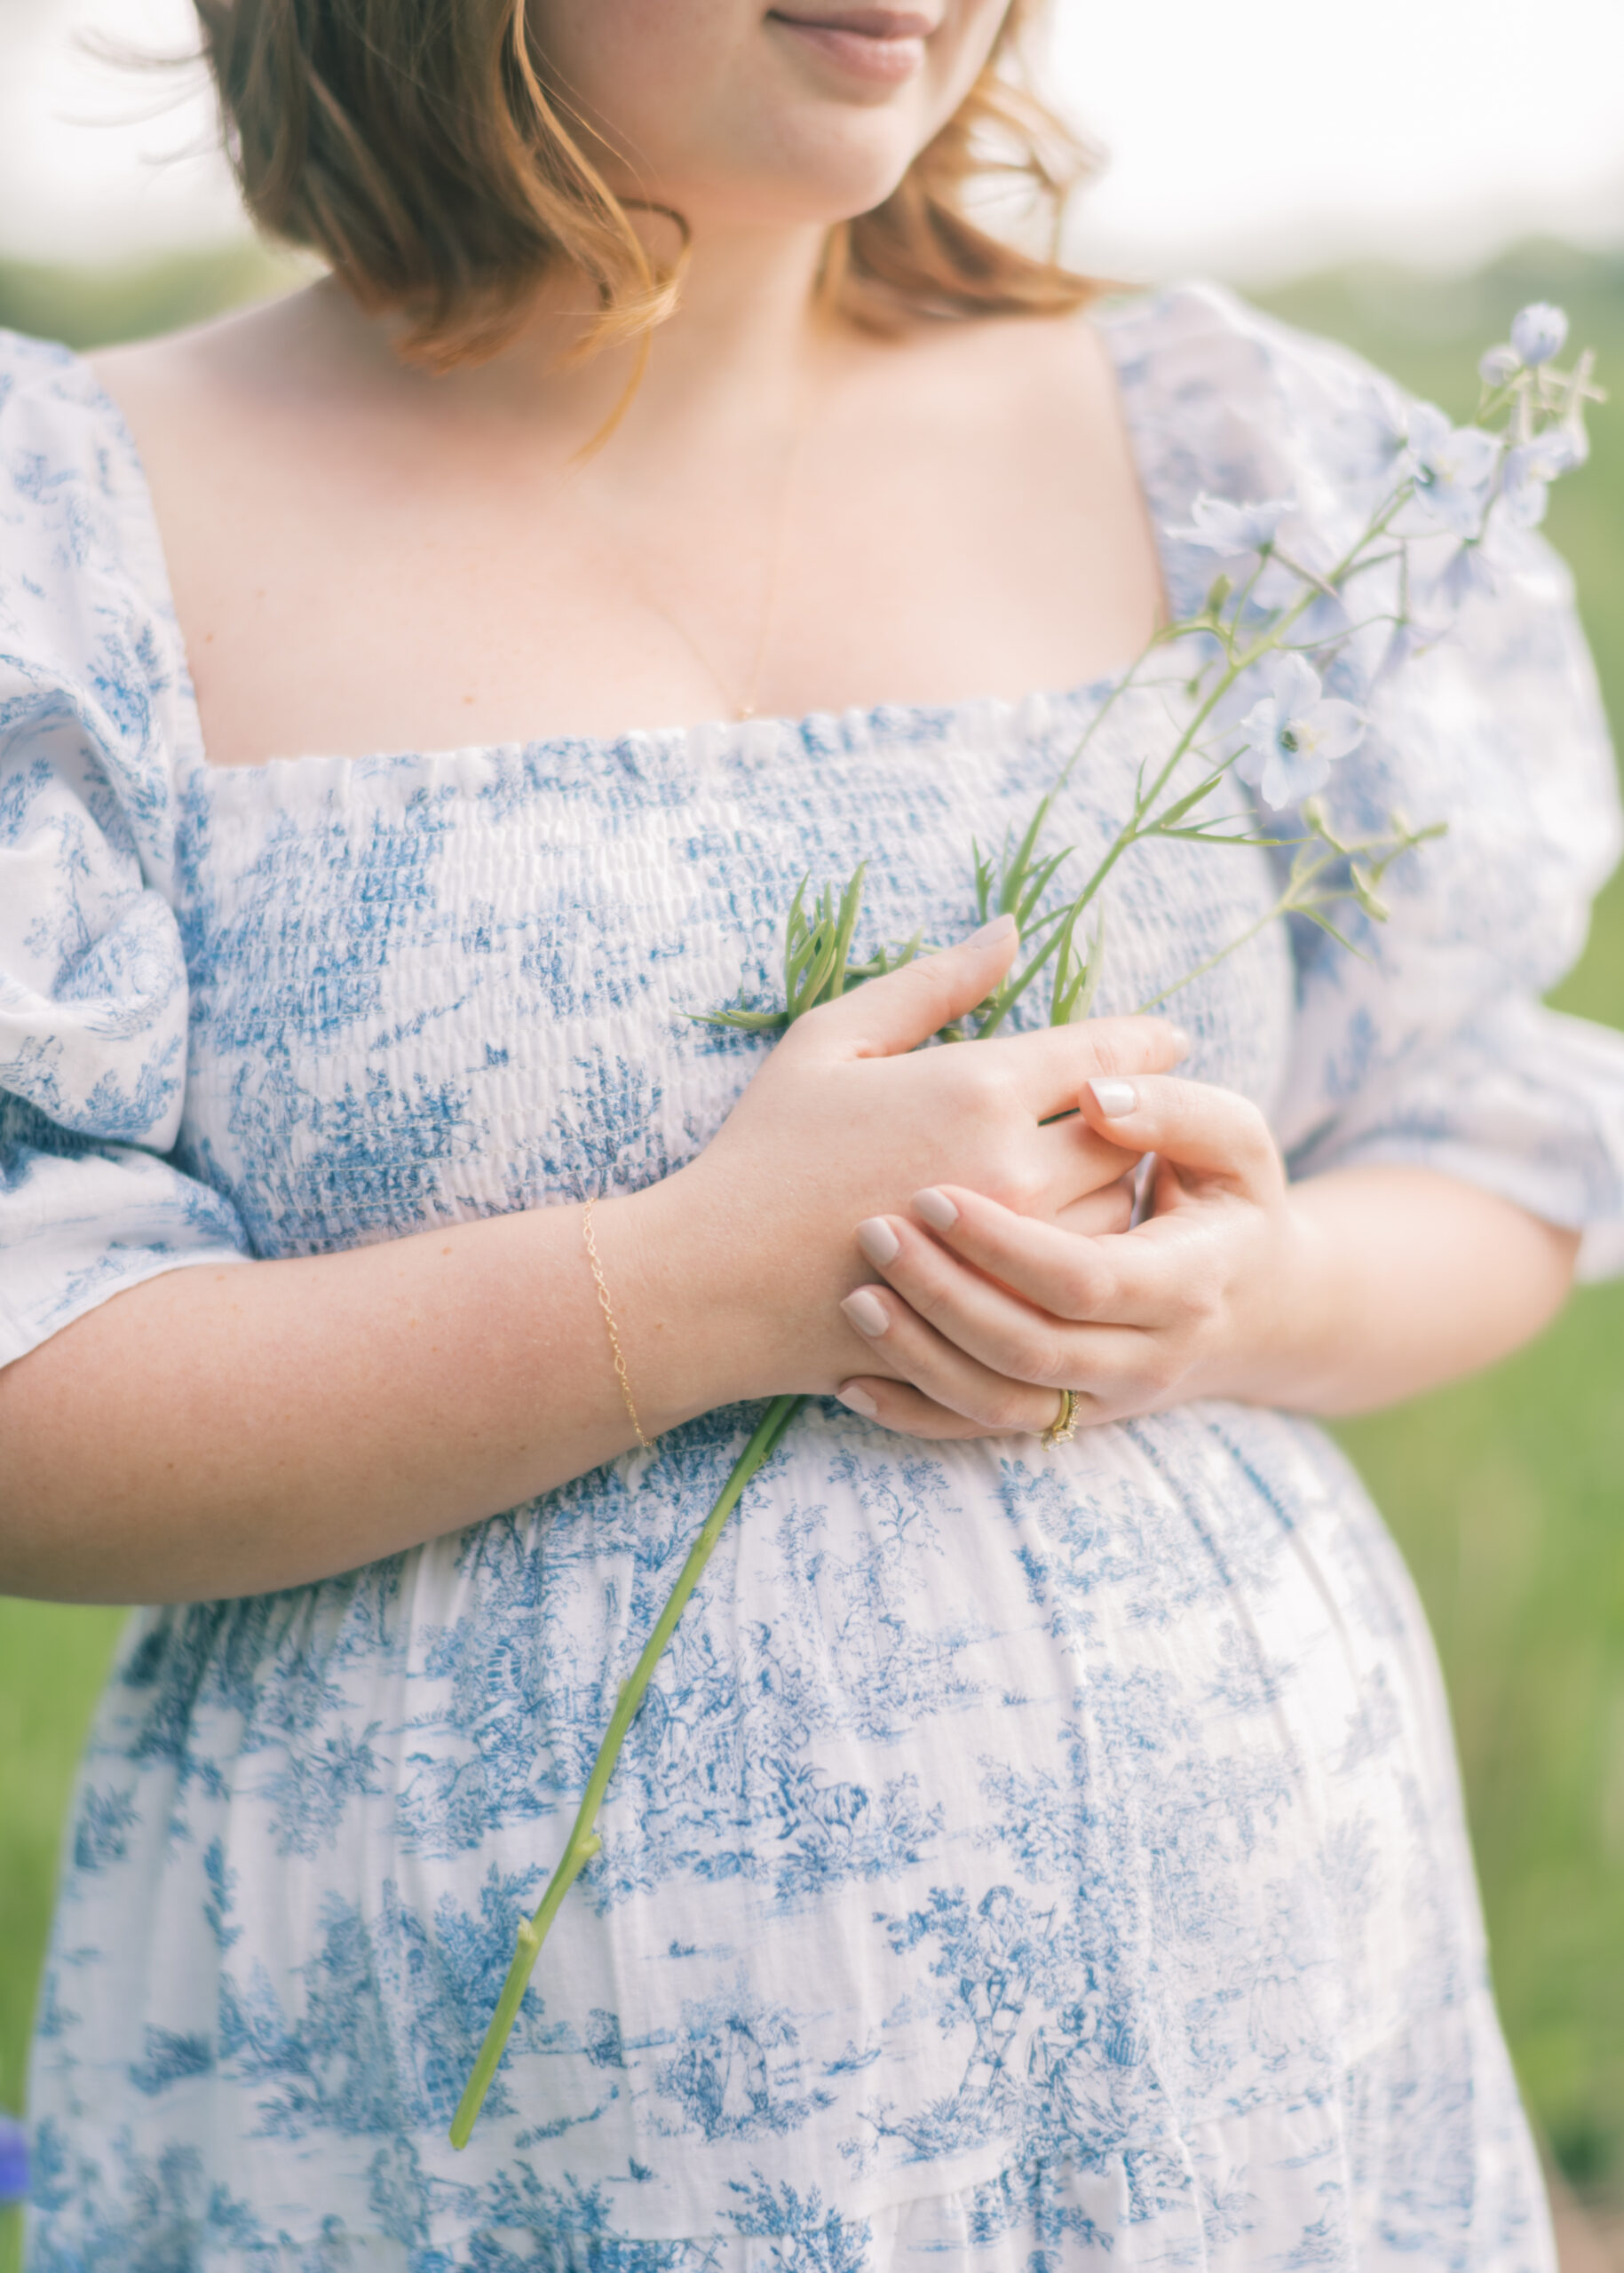 a pregnant woman stands holding a sprig of florals against her bump